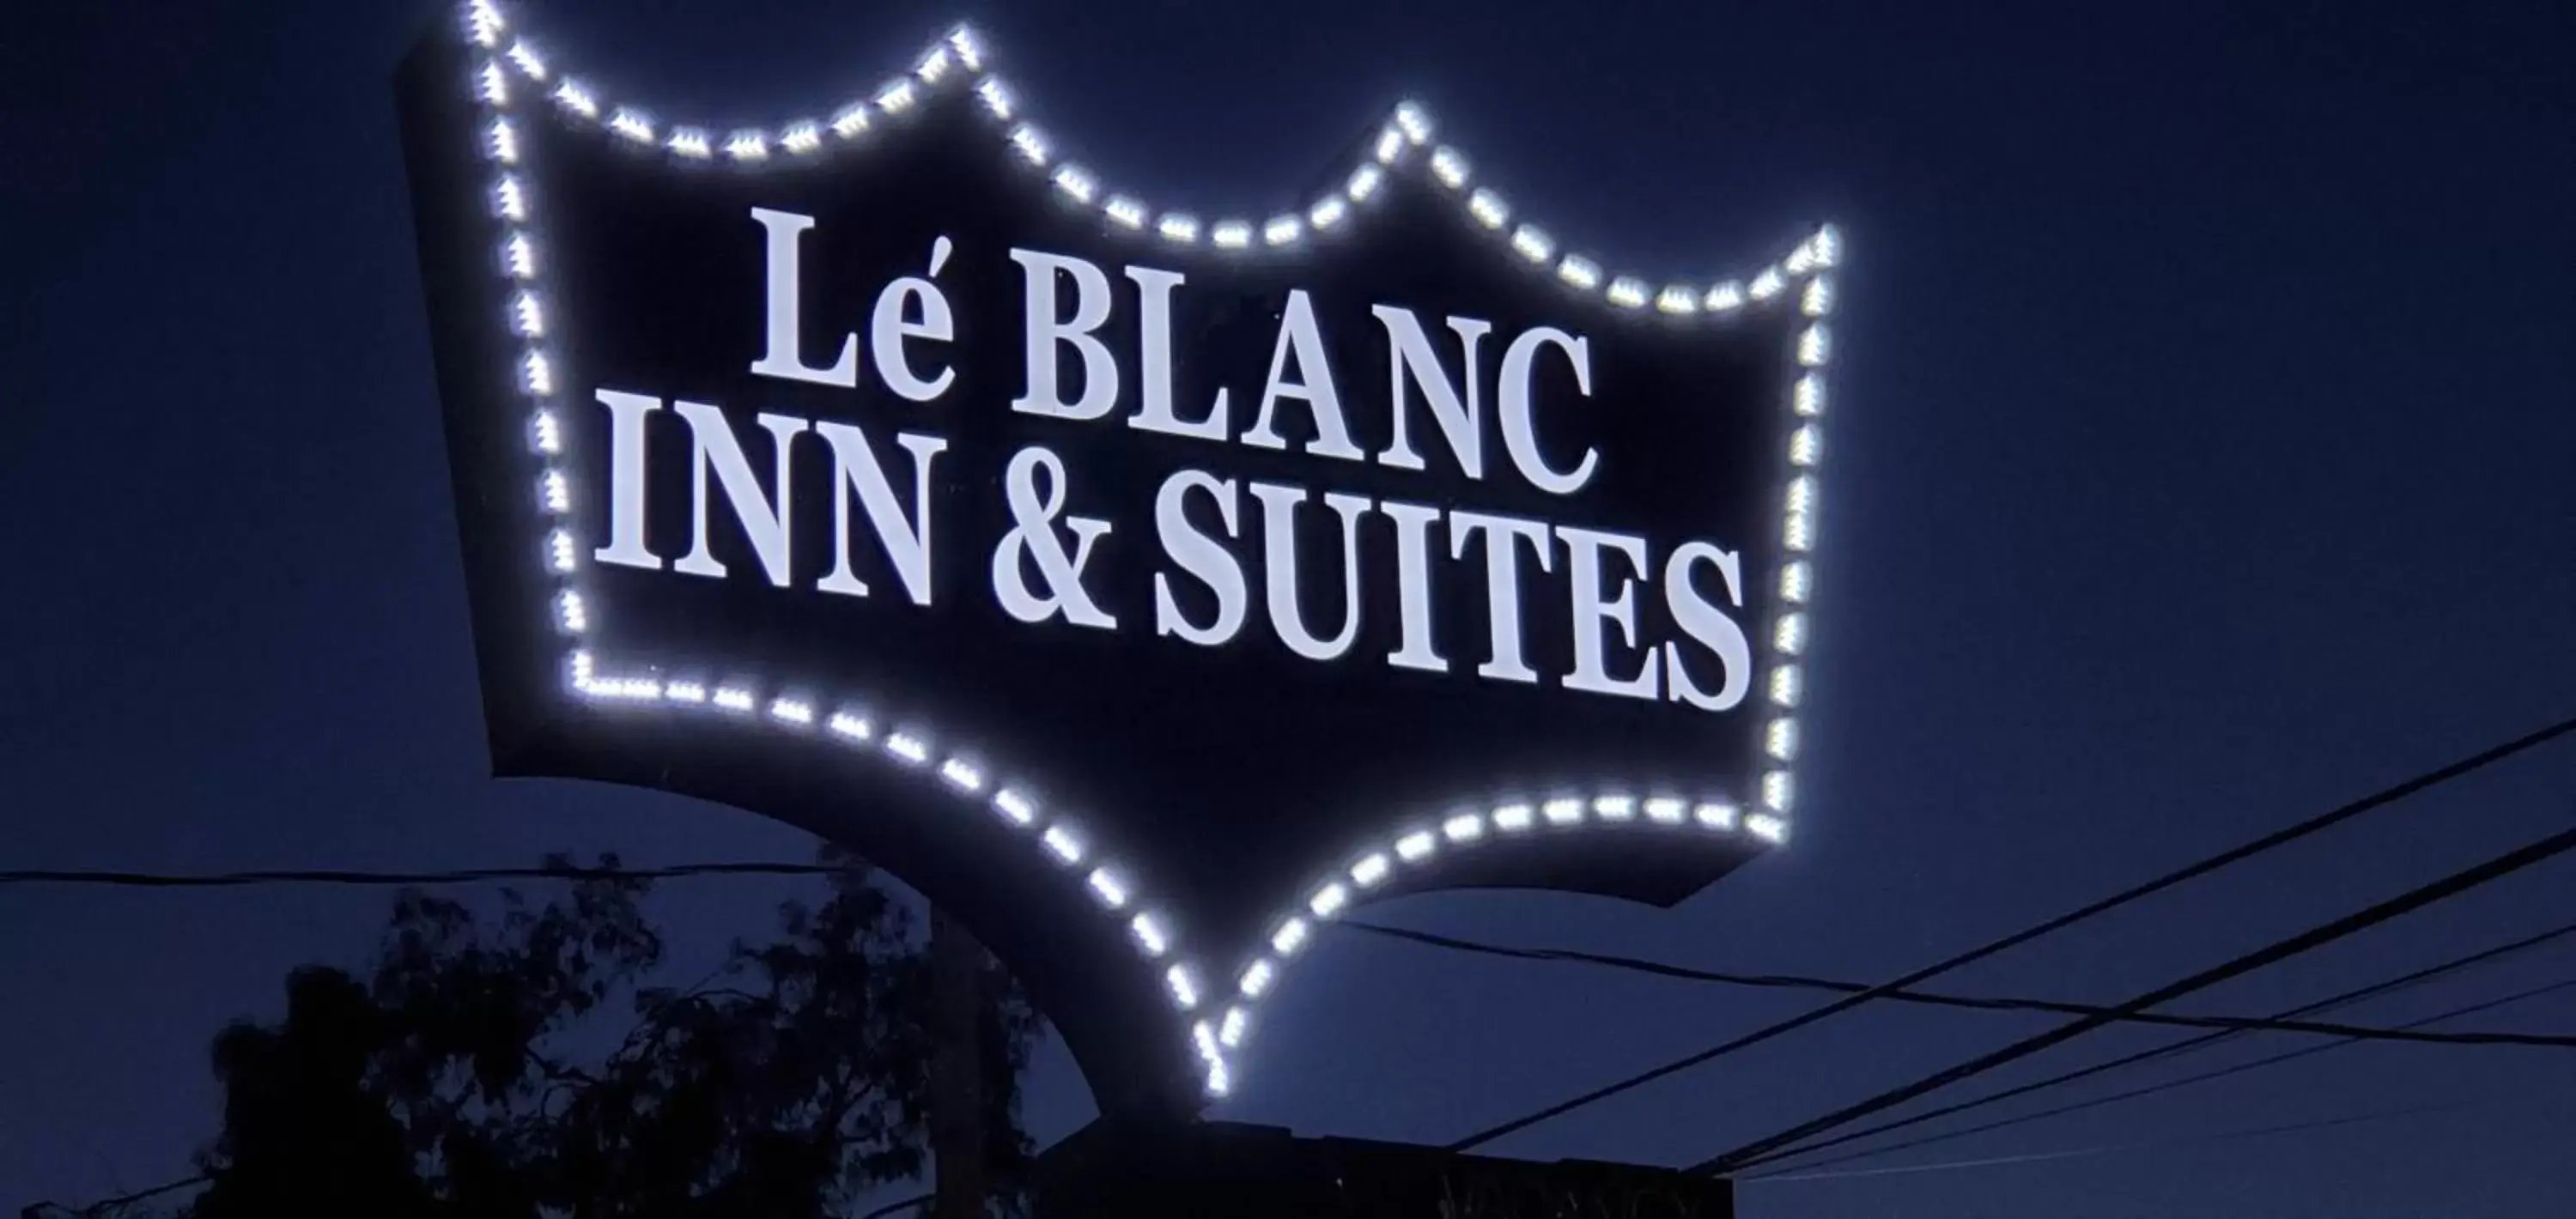 Property logo or sign in Le Blanc Inn & Suites